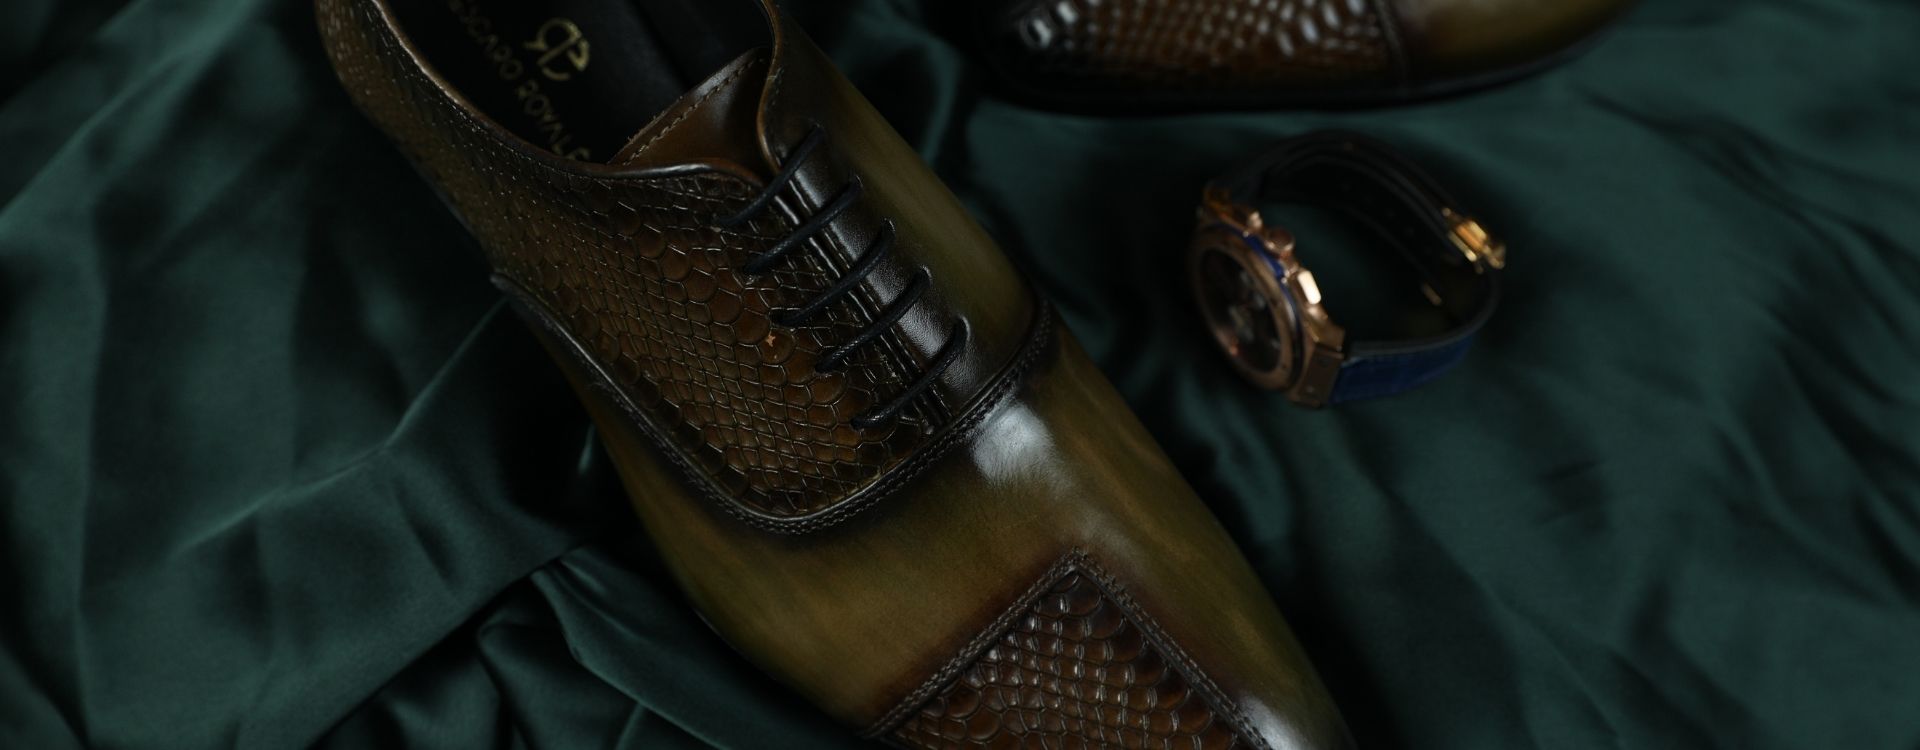 The beauty of full grain leather - the foundation of good long-lasting leather shoes